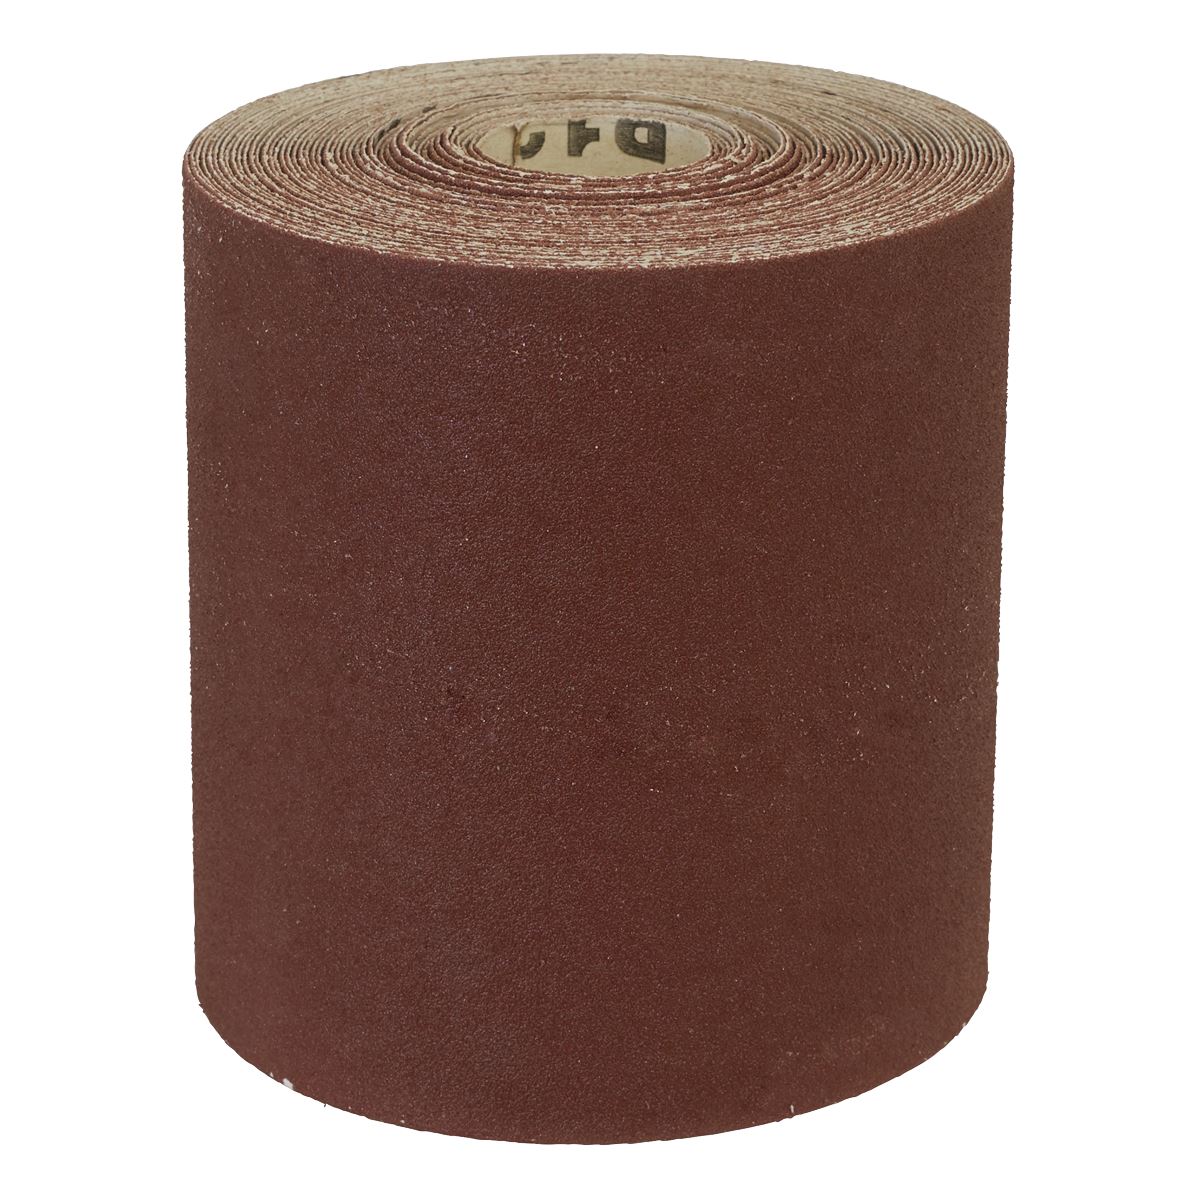 Worksafe by Sealey Production Sanding Roll 115mm x 10m - Medium 80Grit